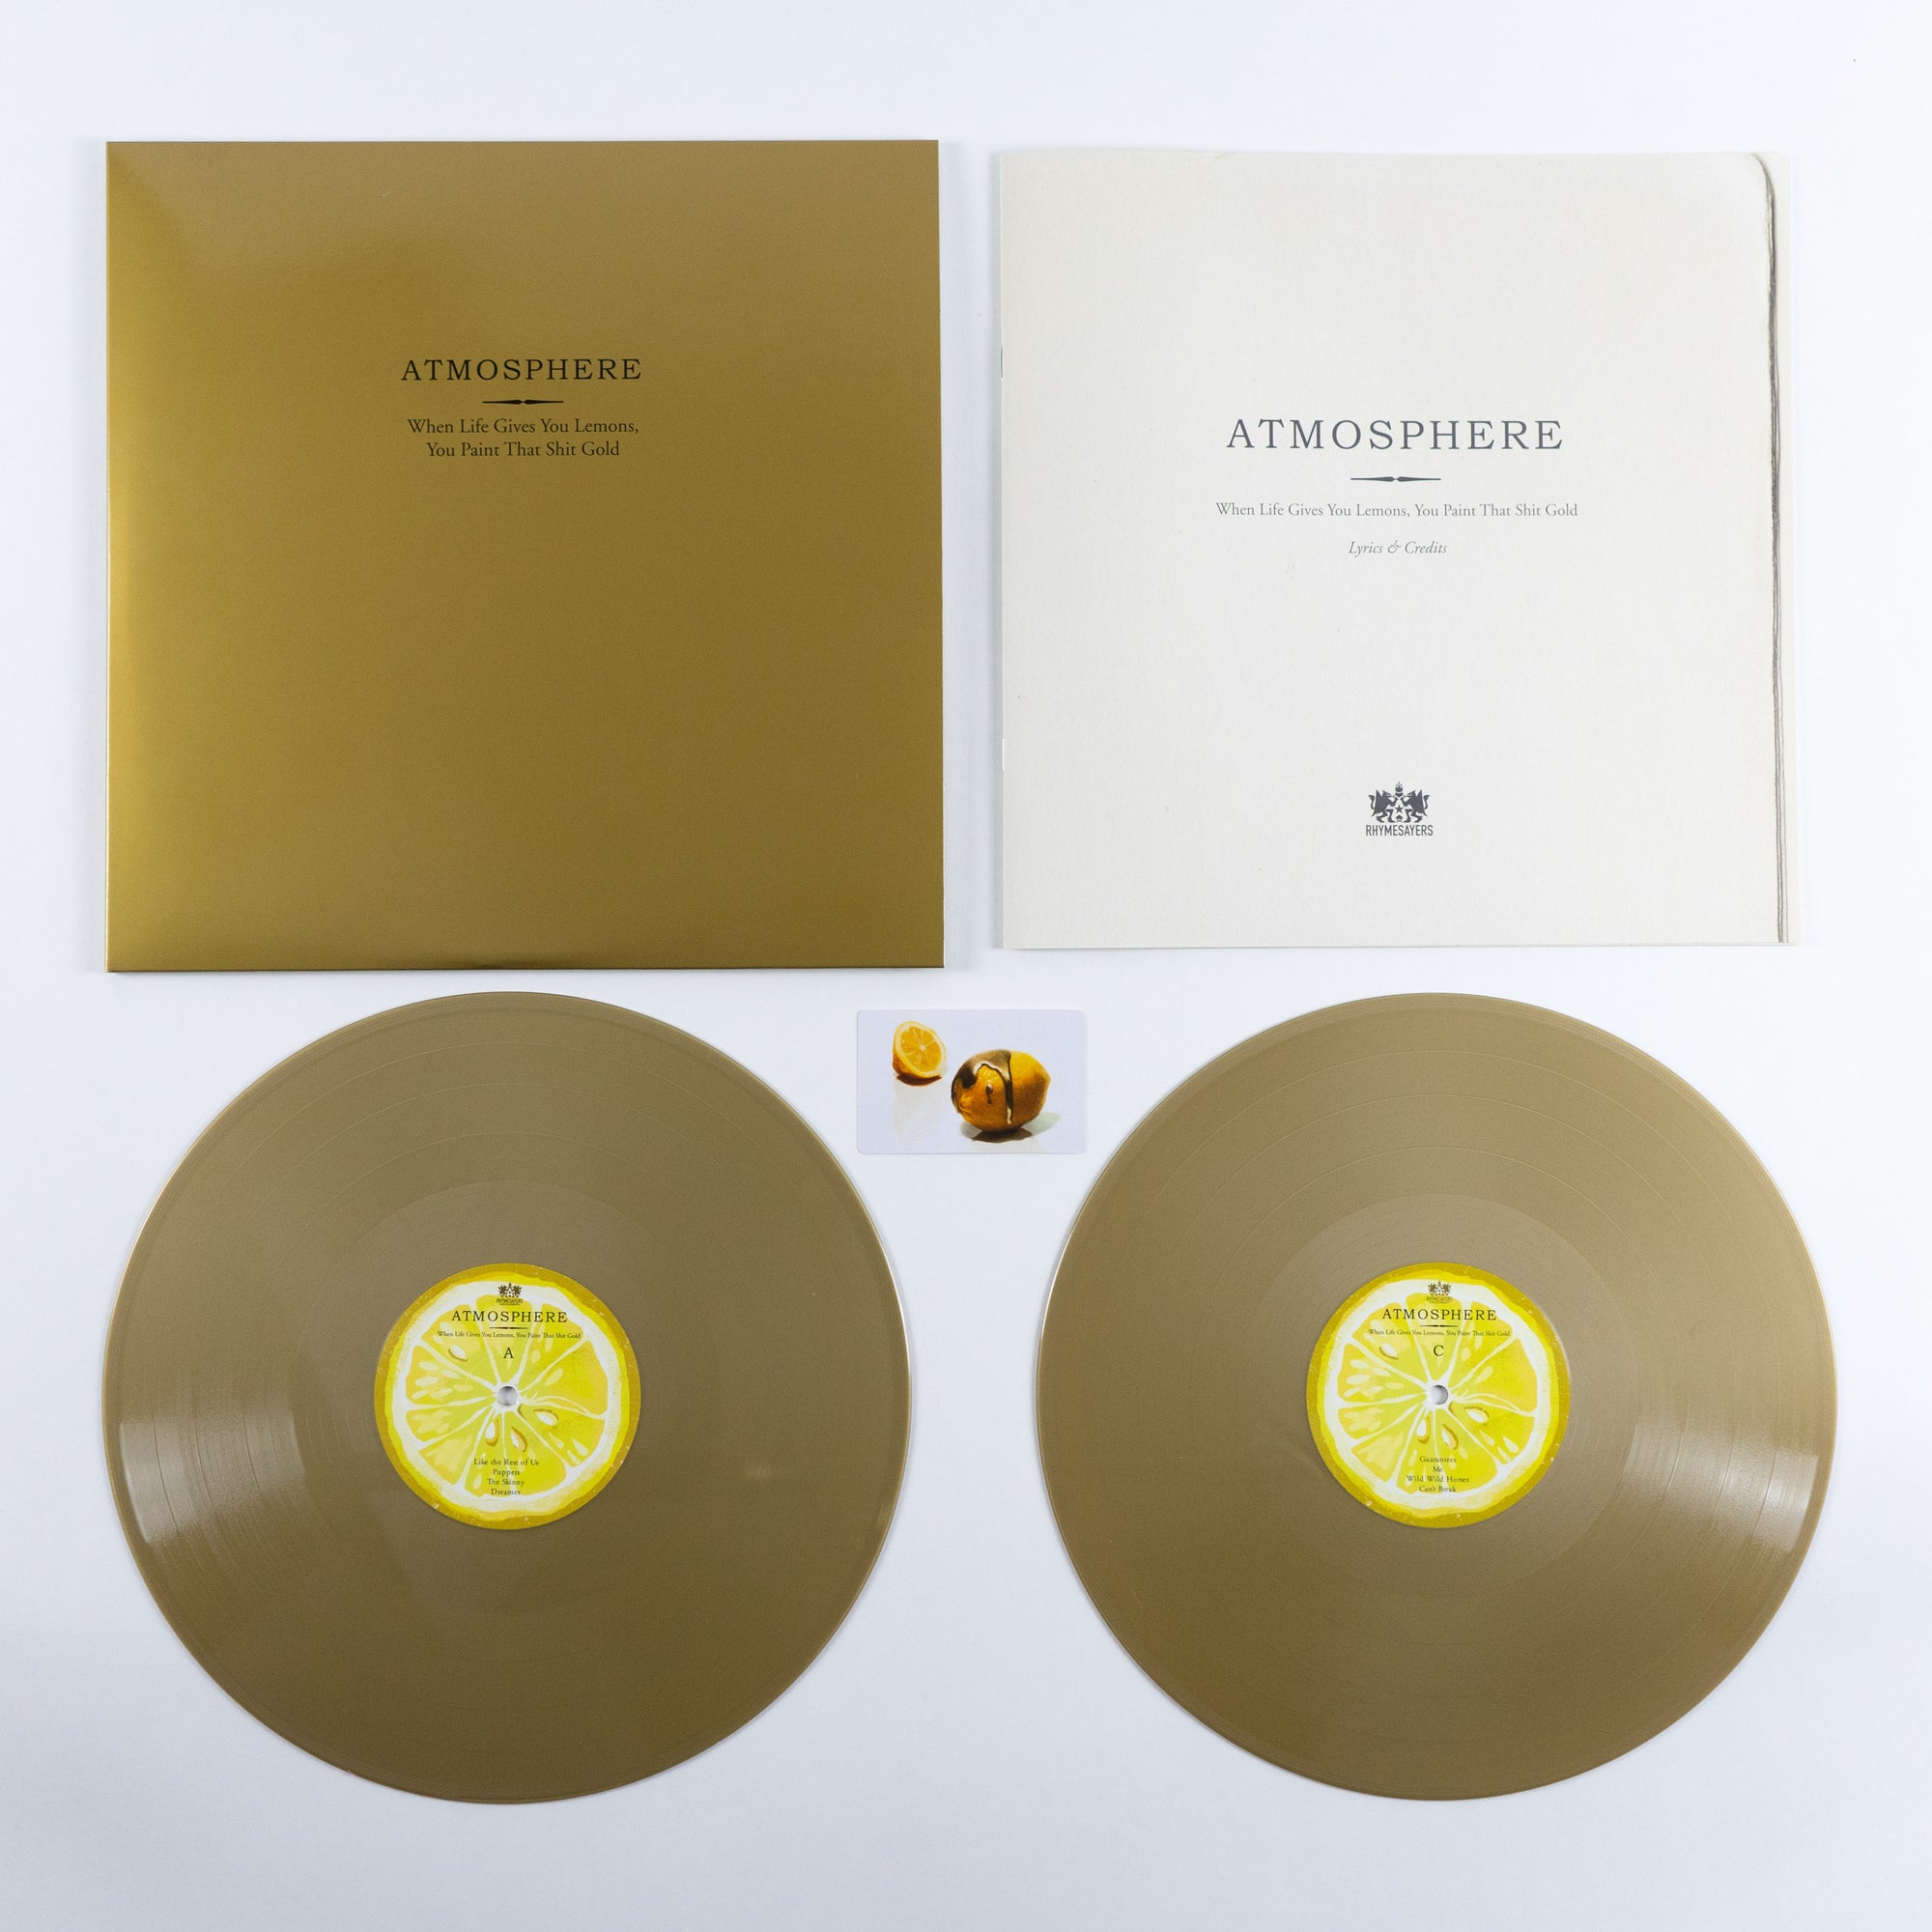 Atmosphere - When Life Gives You Lemons, You Paint That Shit Gold (Vinyl)